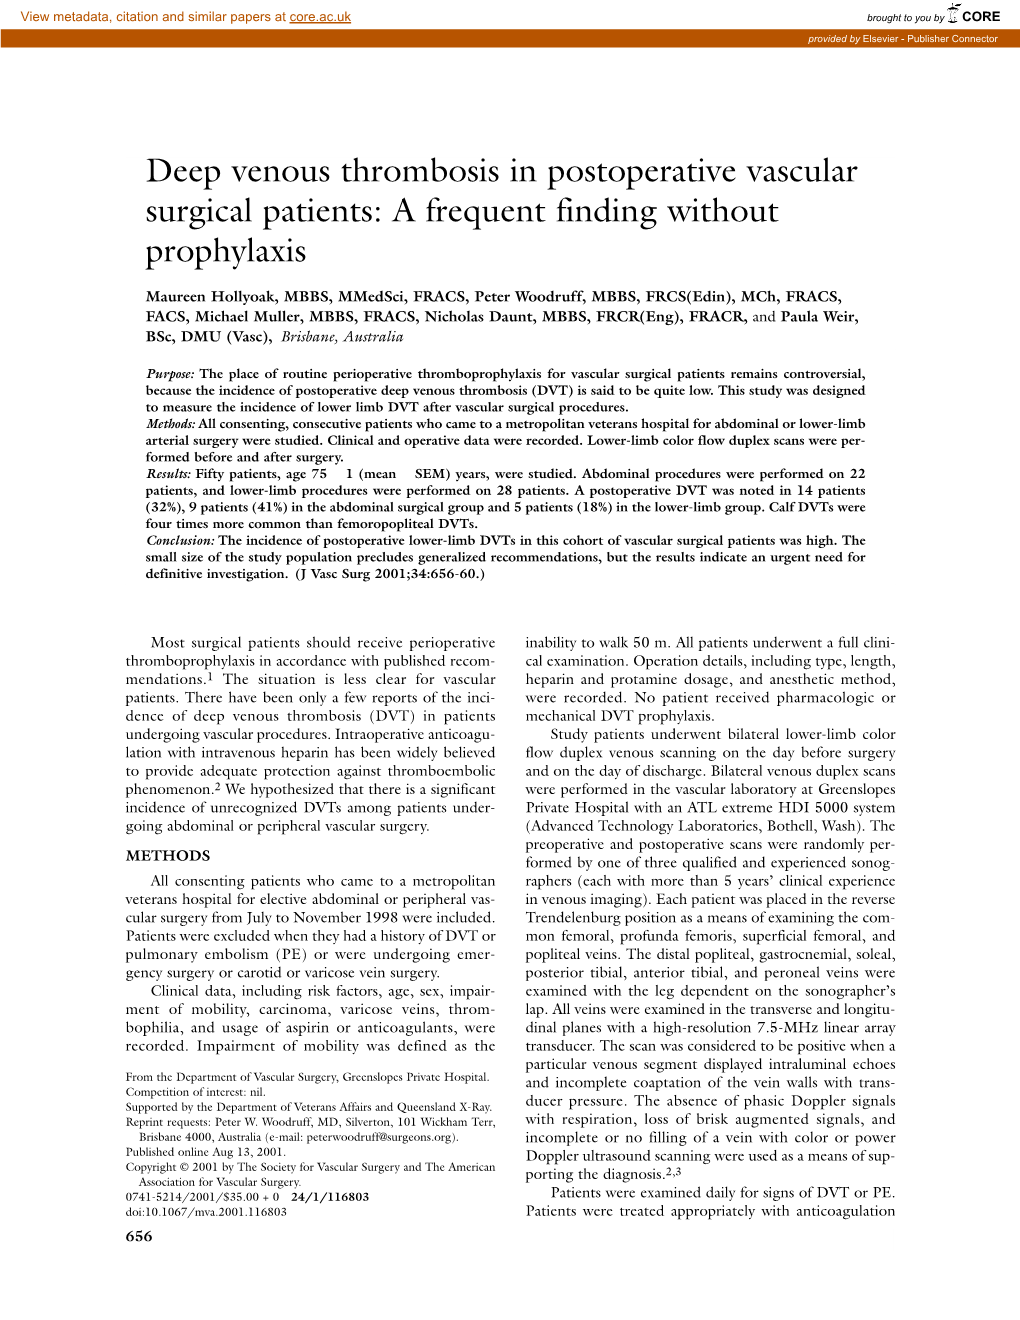 Deep Venous Thrombosis in Postoperative Vascular Surgical Patients: a Frequent Finding Without Prophylaxis